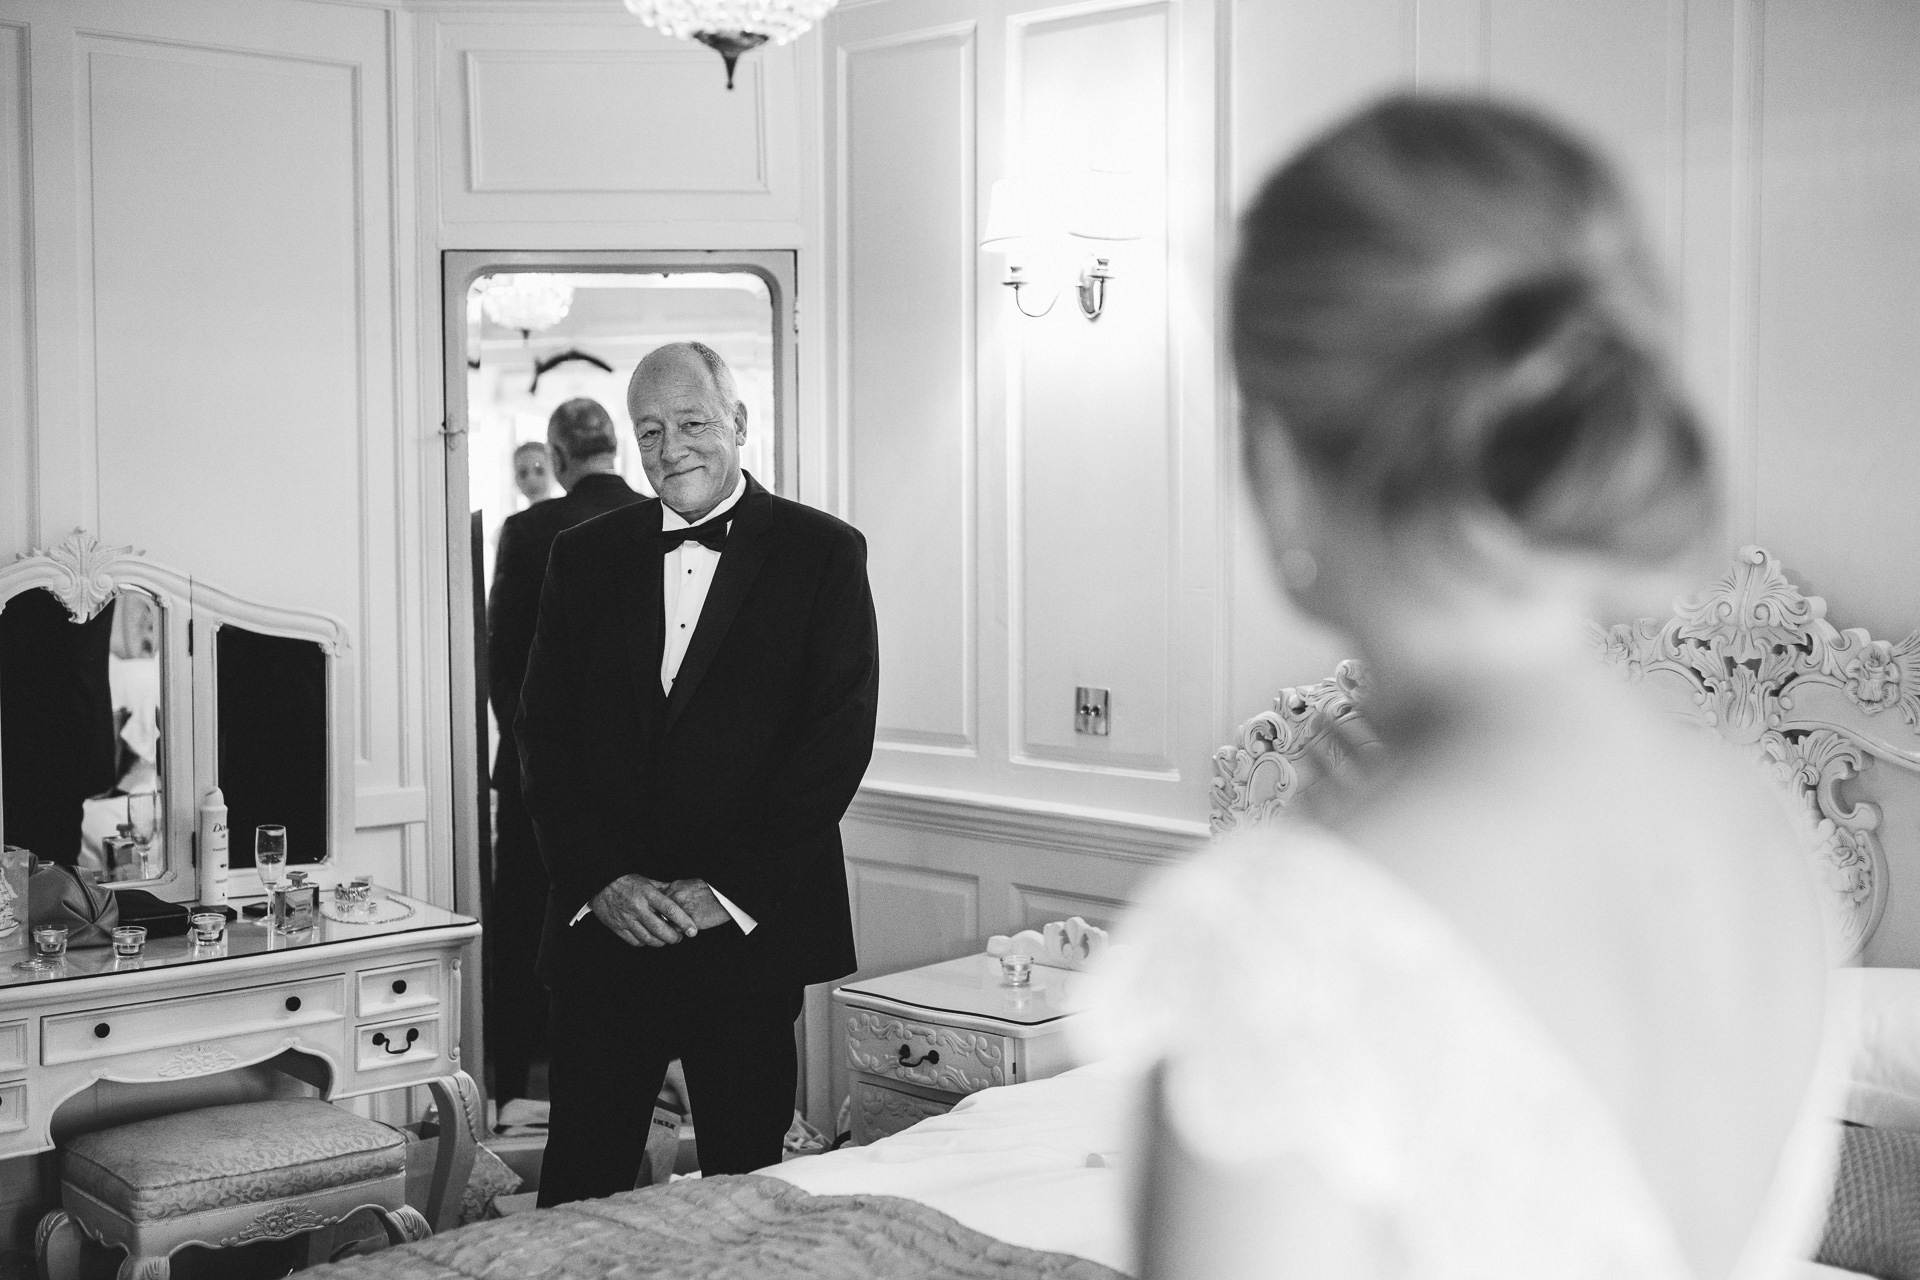 Father looking at daughter in wedding dress and smiling